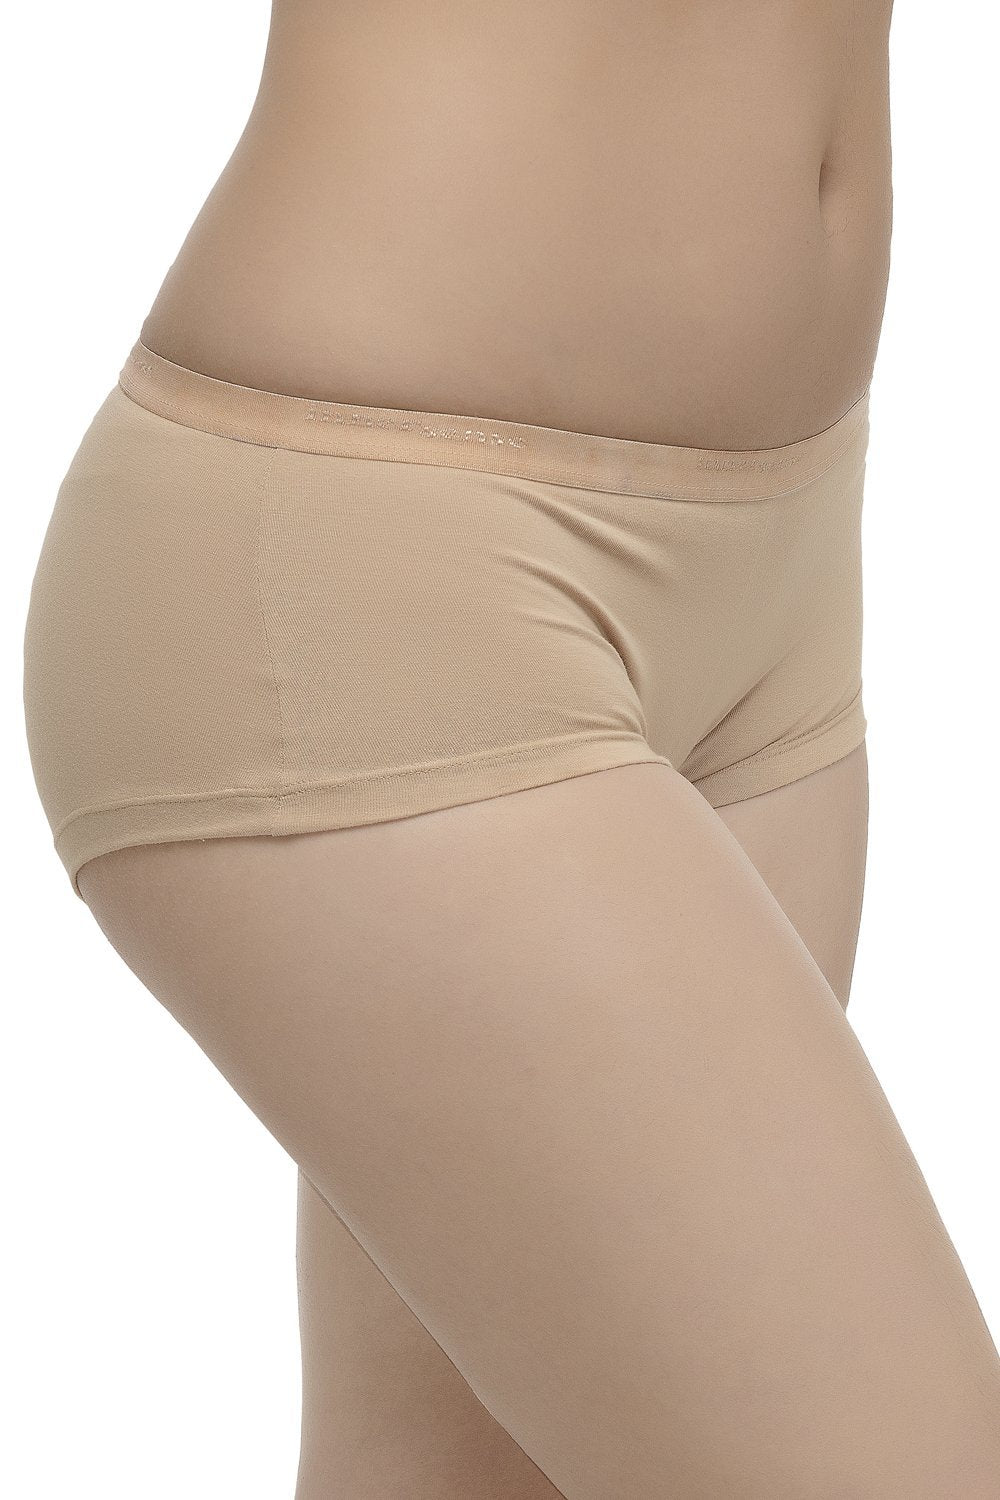 Buy GLAMORAS Women's 100% Cotton Lycra Seamless Mid-Rise Boxer Brief Boyshort  Panty,(Pack of 2) Black-Beige, Free Size at